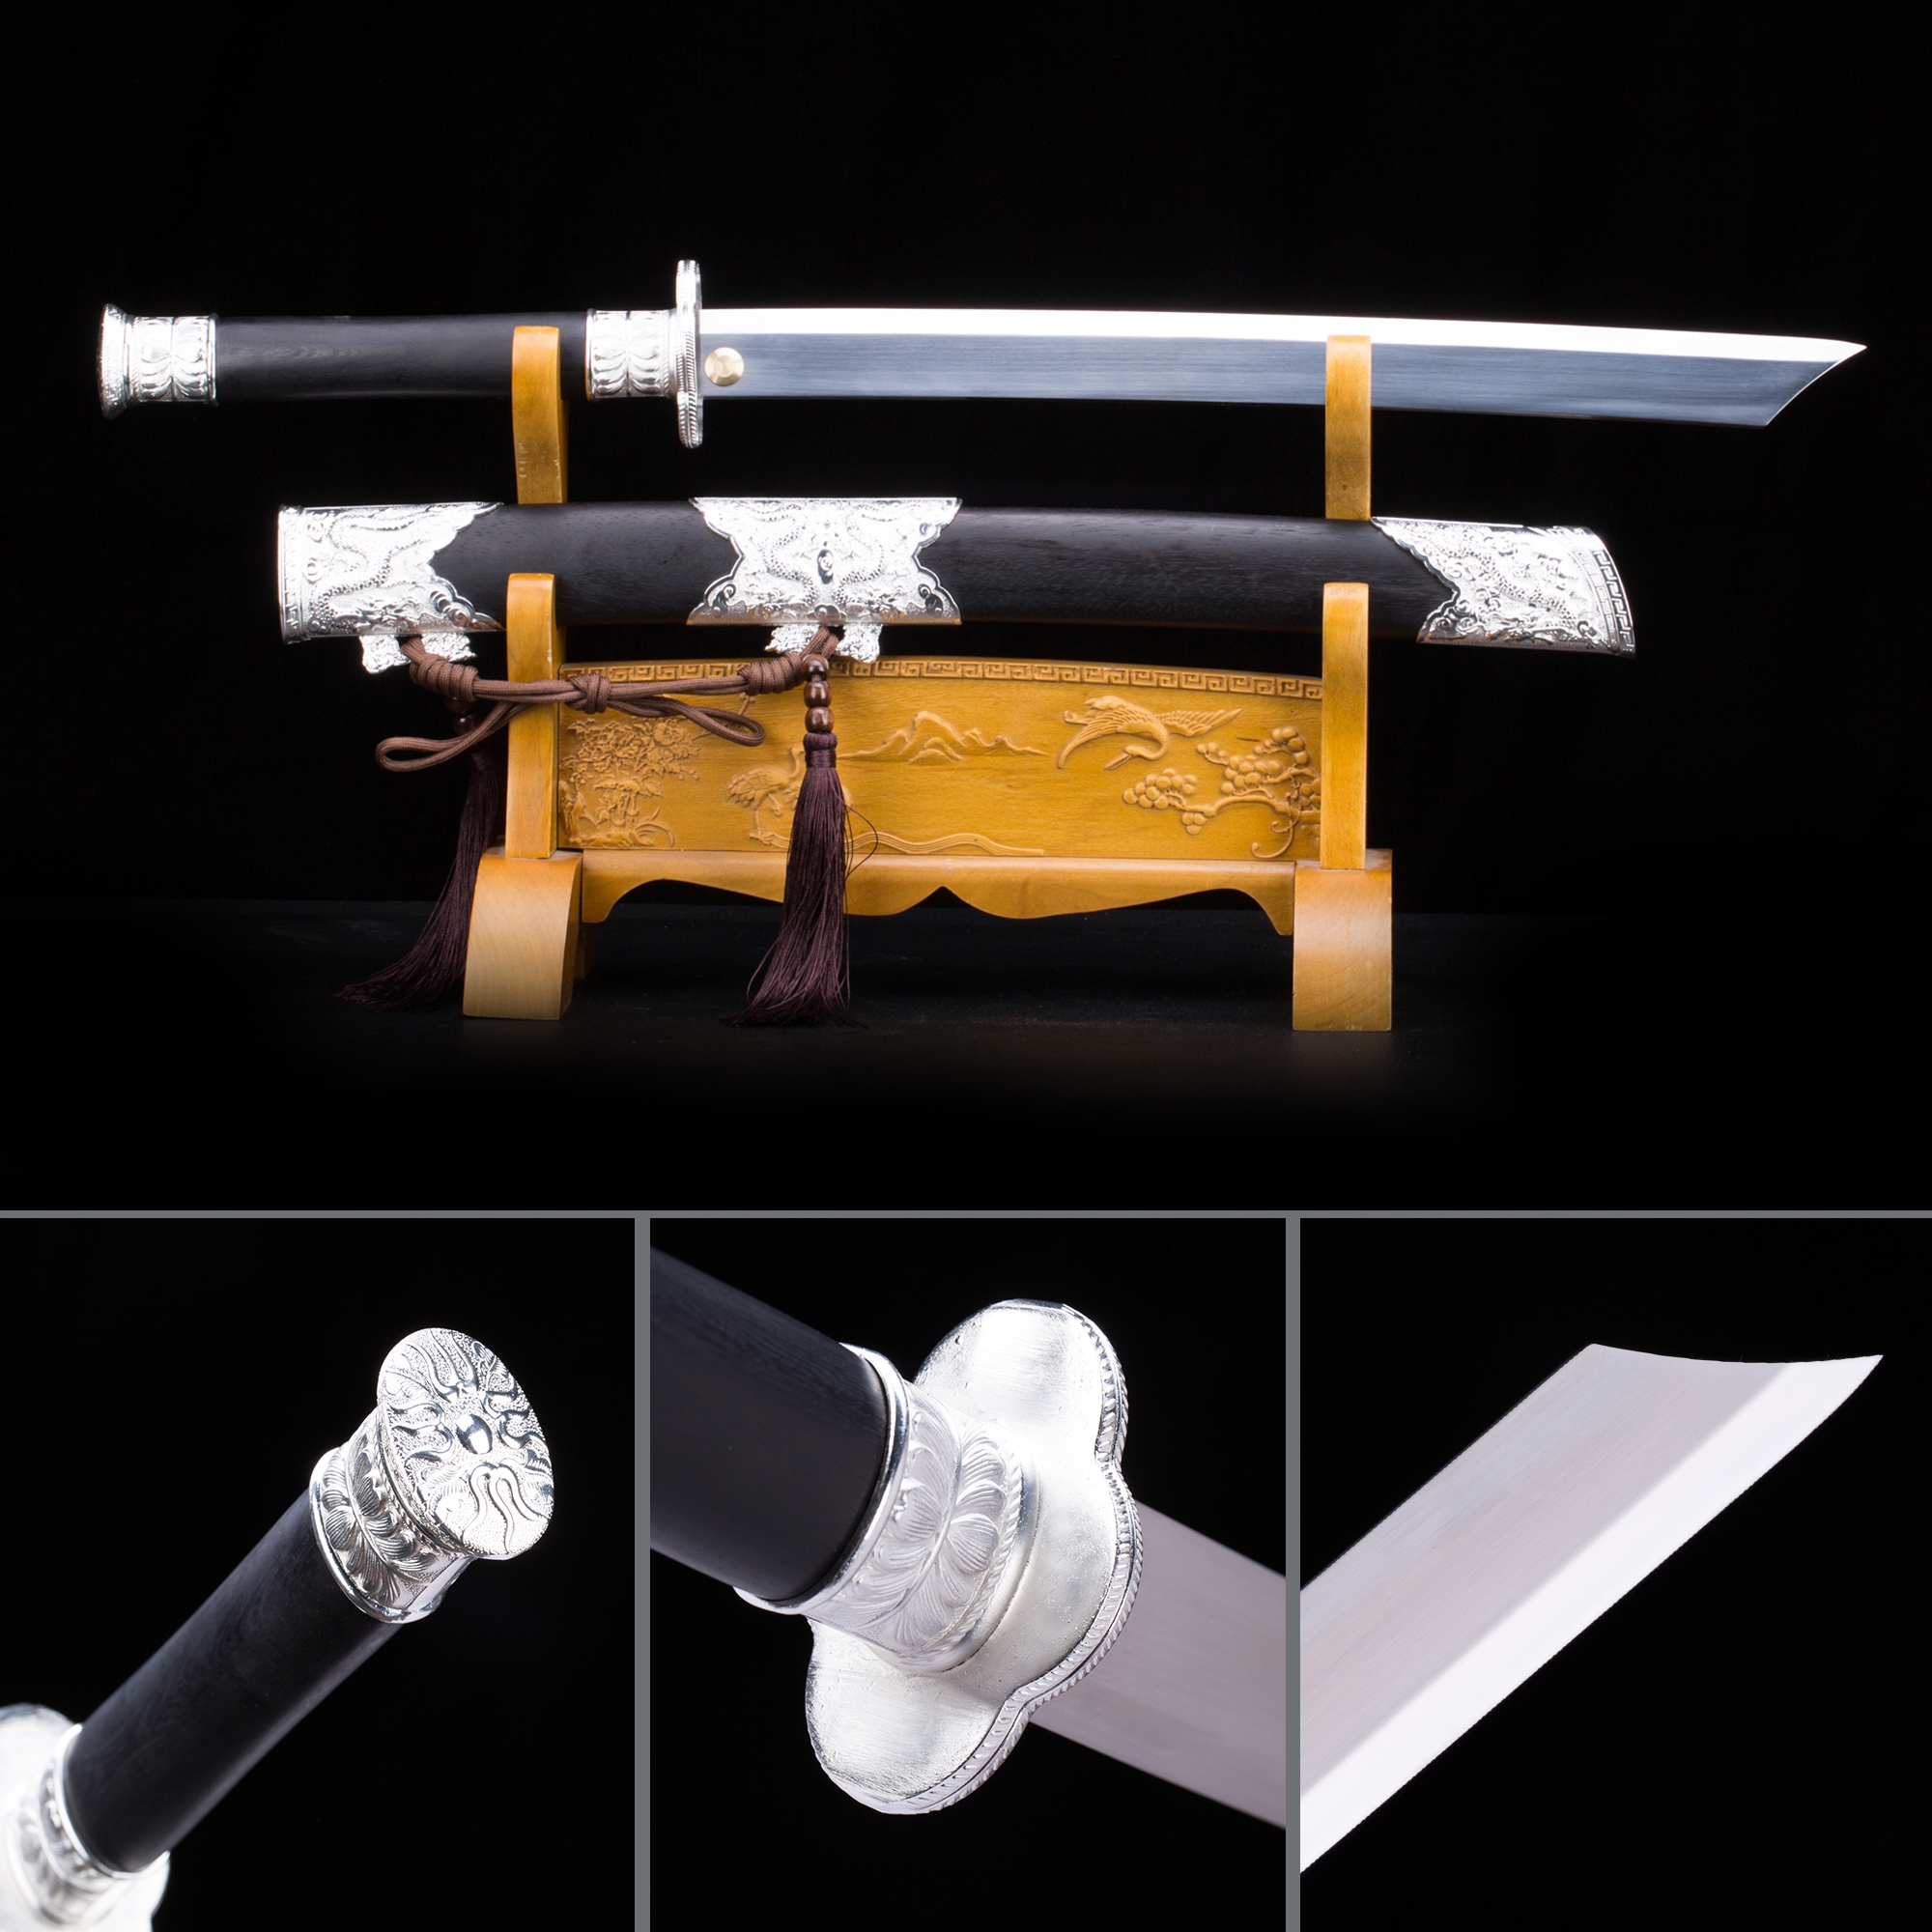 Handmade Stainless Steel Chinese Dao Broadsword With Blackwood Scabbard